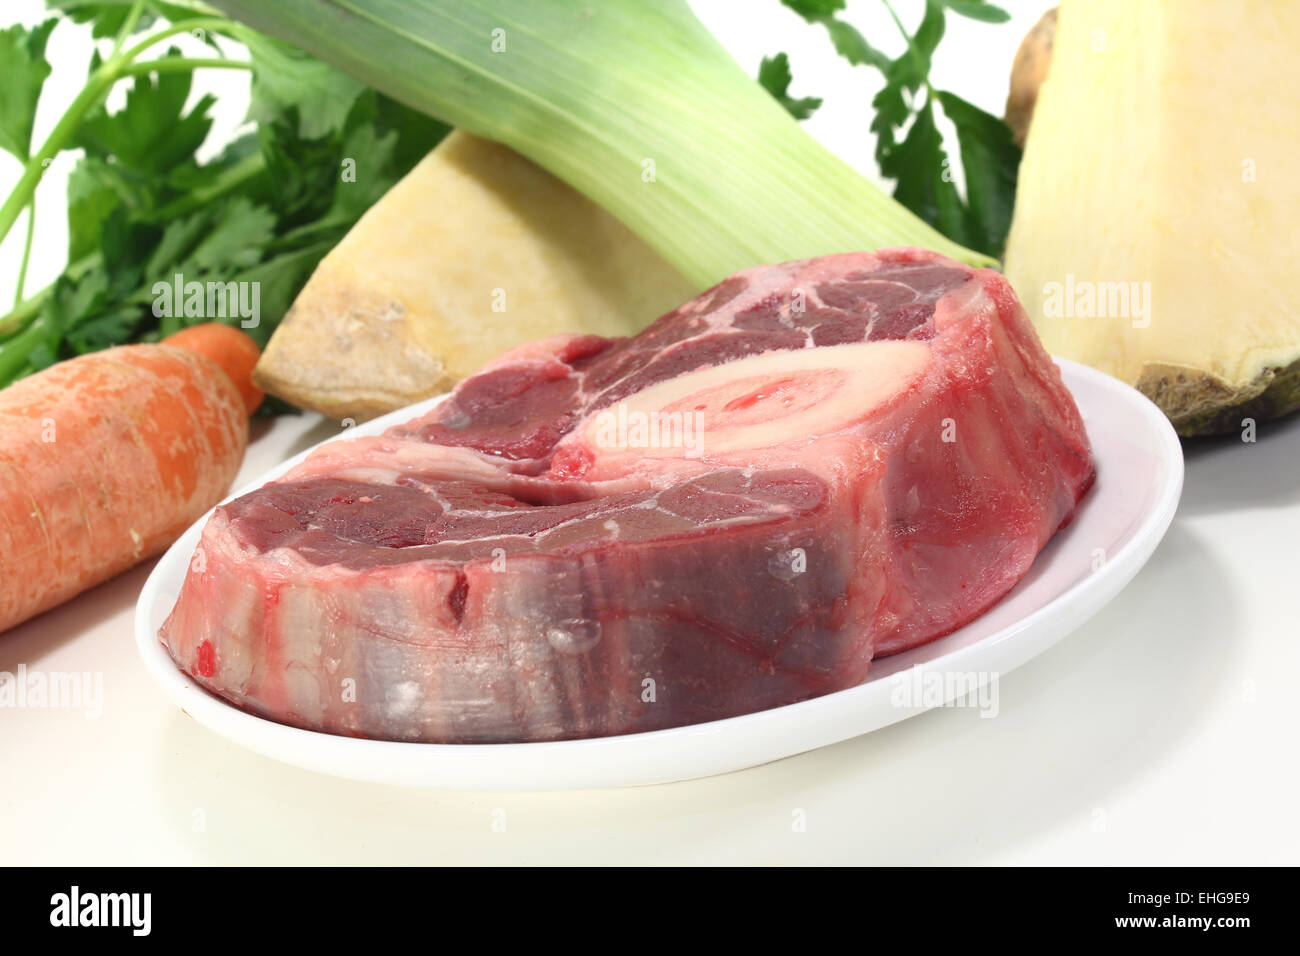 raw leg slice with soup vegetables Stock Photo